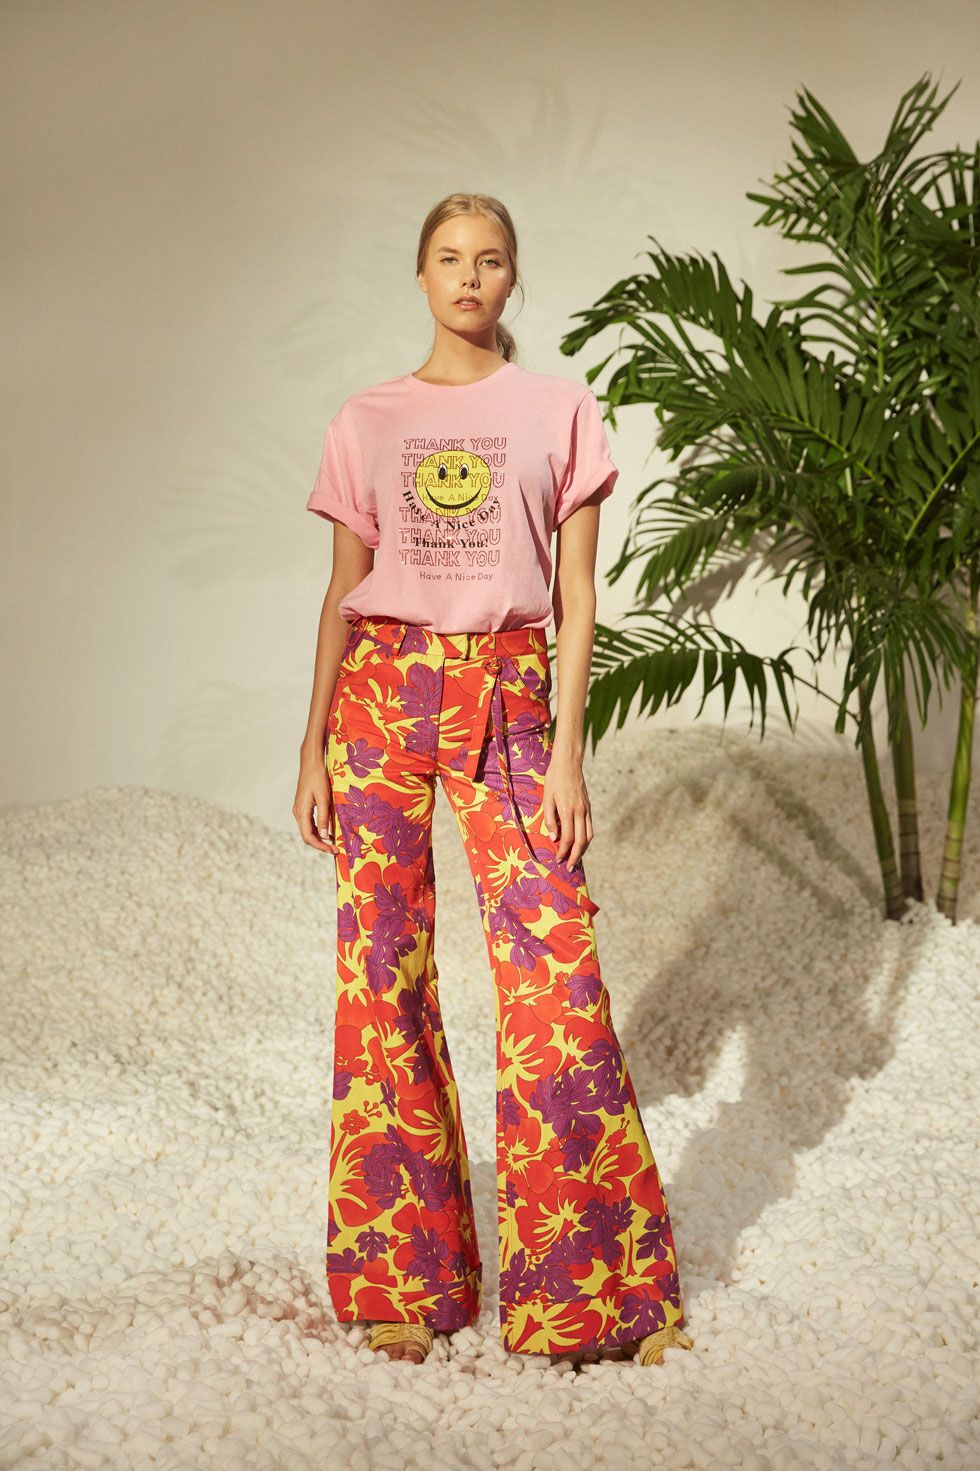 <p>          The runway season brought posi vibes&nbsp;with&nbsp;graphic tees. From this plastic bag-inspired shirt from Rosie Assouline to&nbsp;<a href="http://www.elle.com/fashion/news/a39695/dior-recap-spring-2017-maria-grazia-chiuri/" data-tracking-id="recirc-text-link">Christian Dior's feminist mantras</a>, we'll be letting our clothes&nbsp;speak for themselves this year.&nbsp;  <span class="redactor-invisible-space" data-verified="redactor" data-redactor-tag="span" data-redactor-class="redactor-invisible-space"></span></p>